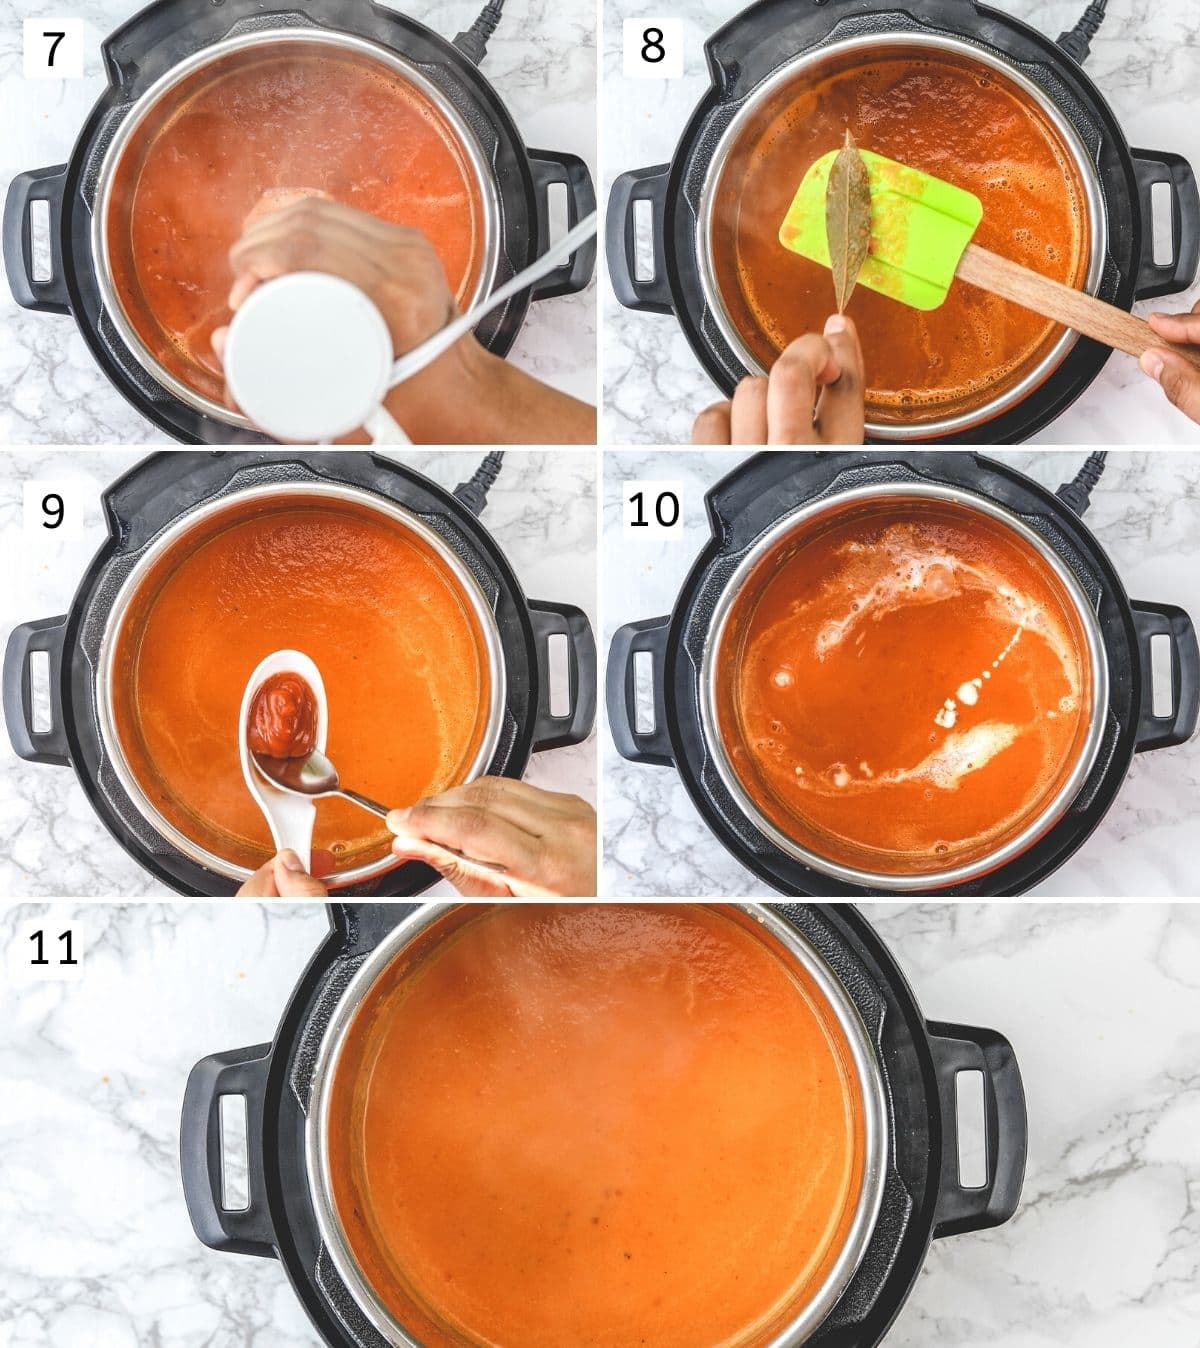 Collage of 5 steps showing removing bay leaf, grinding to smooth puree, adding ketchup and cream.